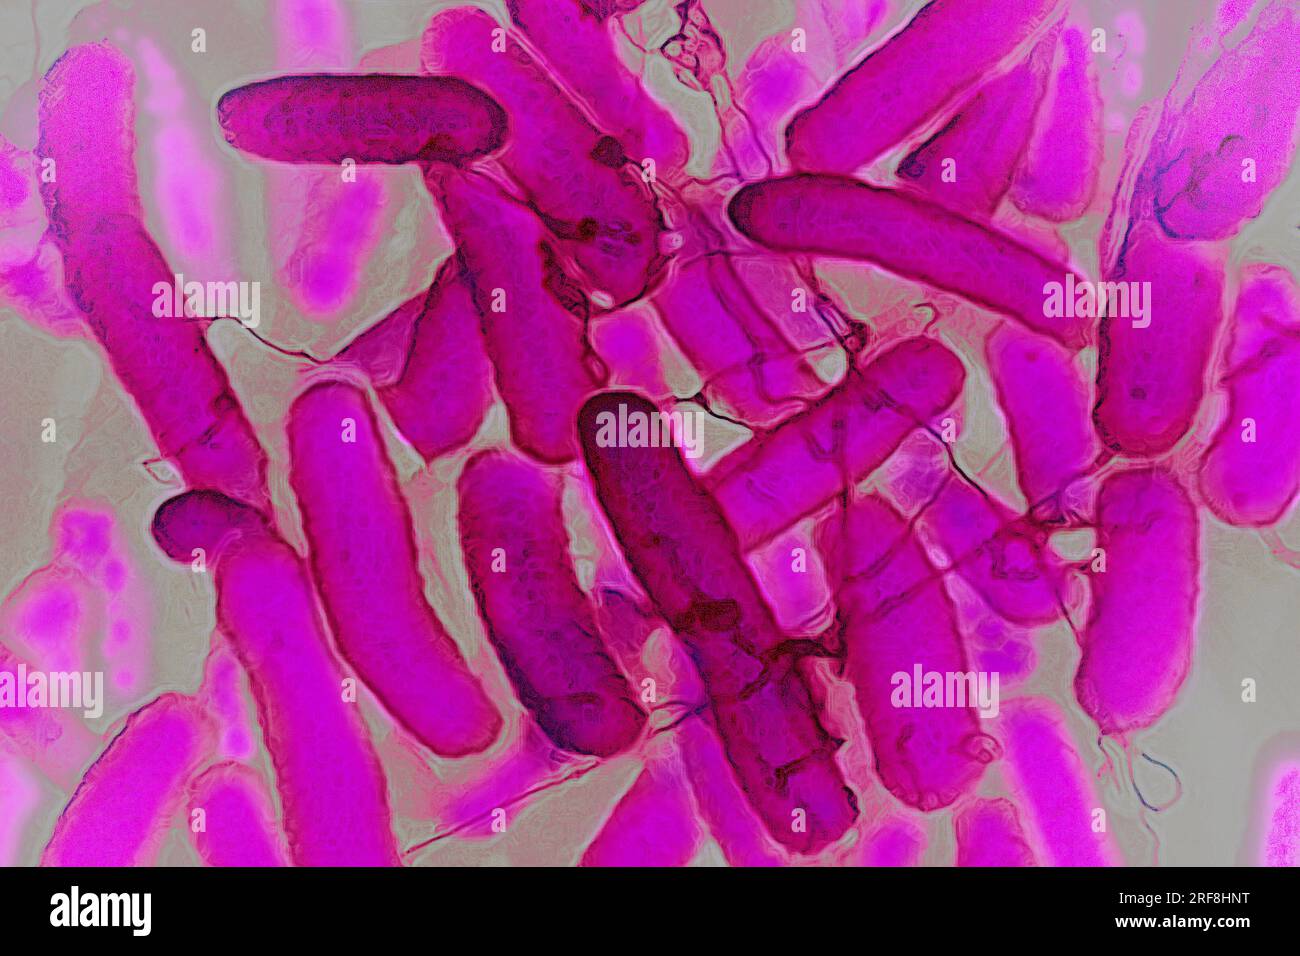 Escherichia coli (intestinal bacteria that resides in the digestive tract of humans and warm-blooded animals, it is the cause of food poisoning. Stock Photo